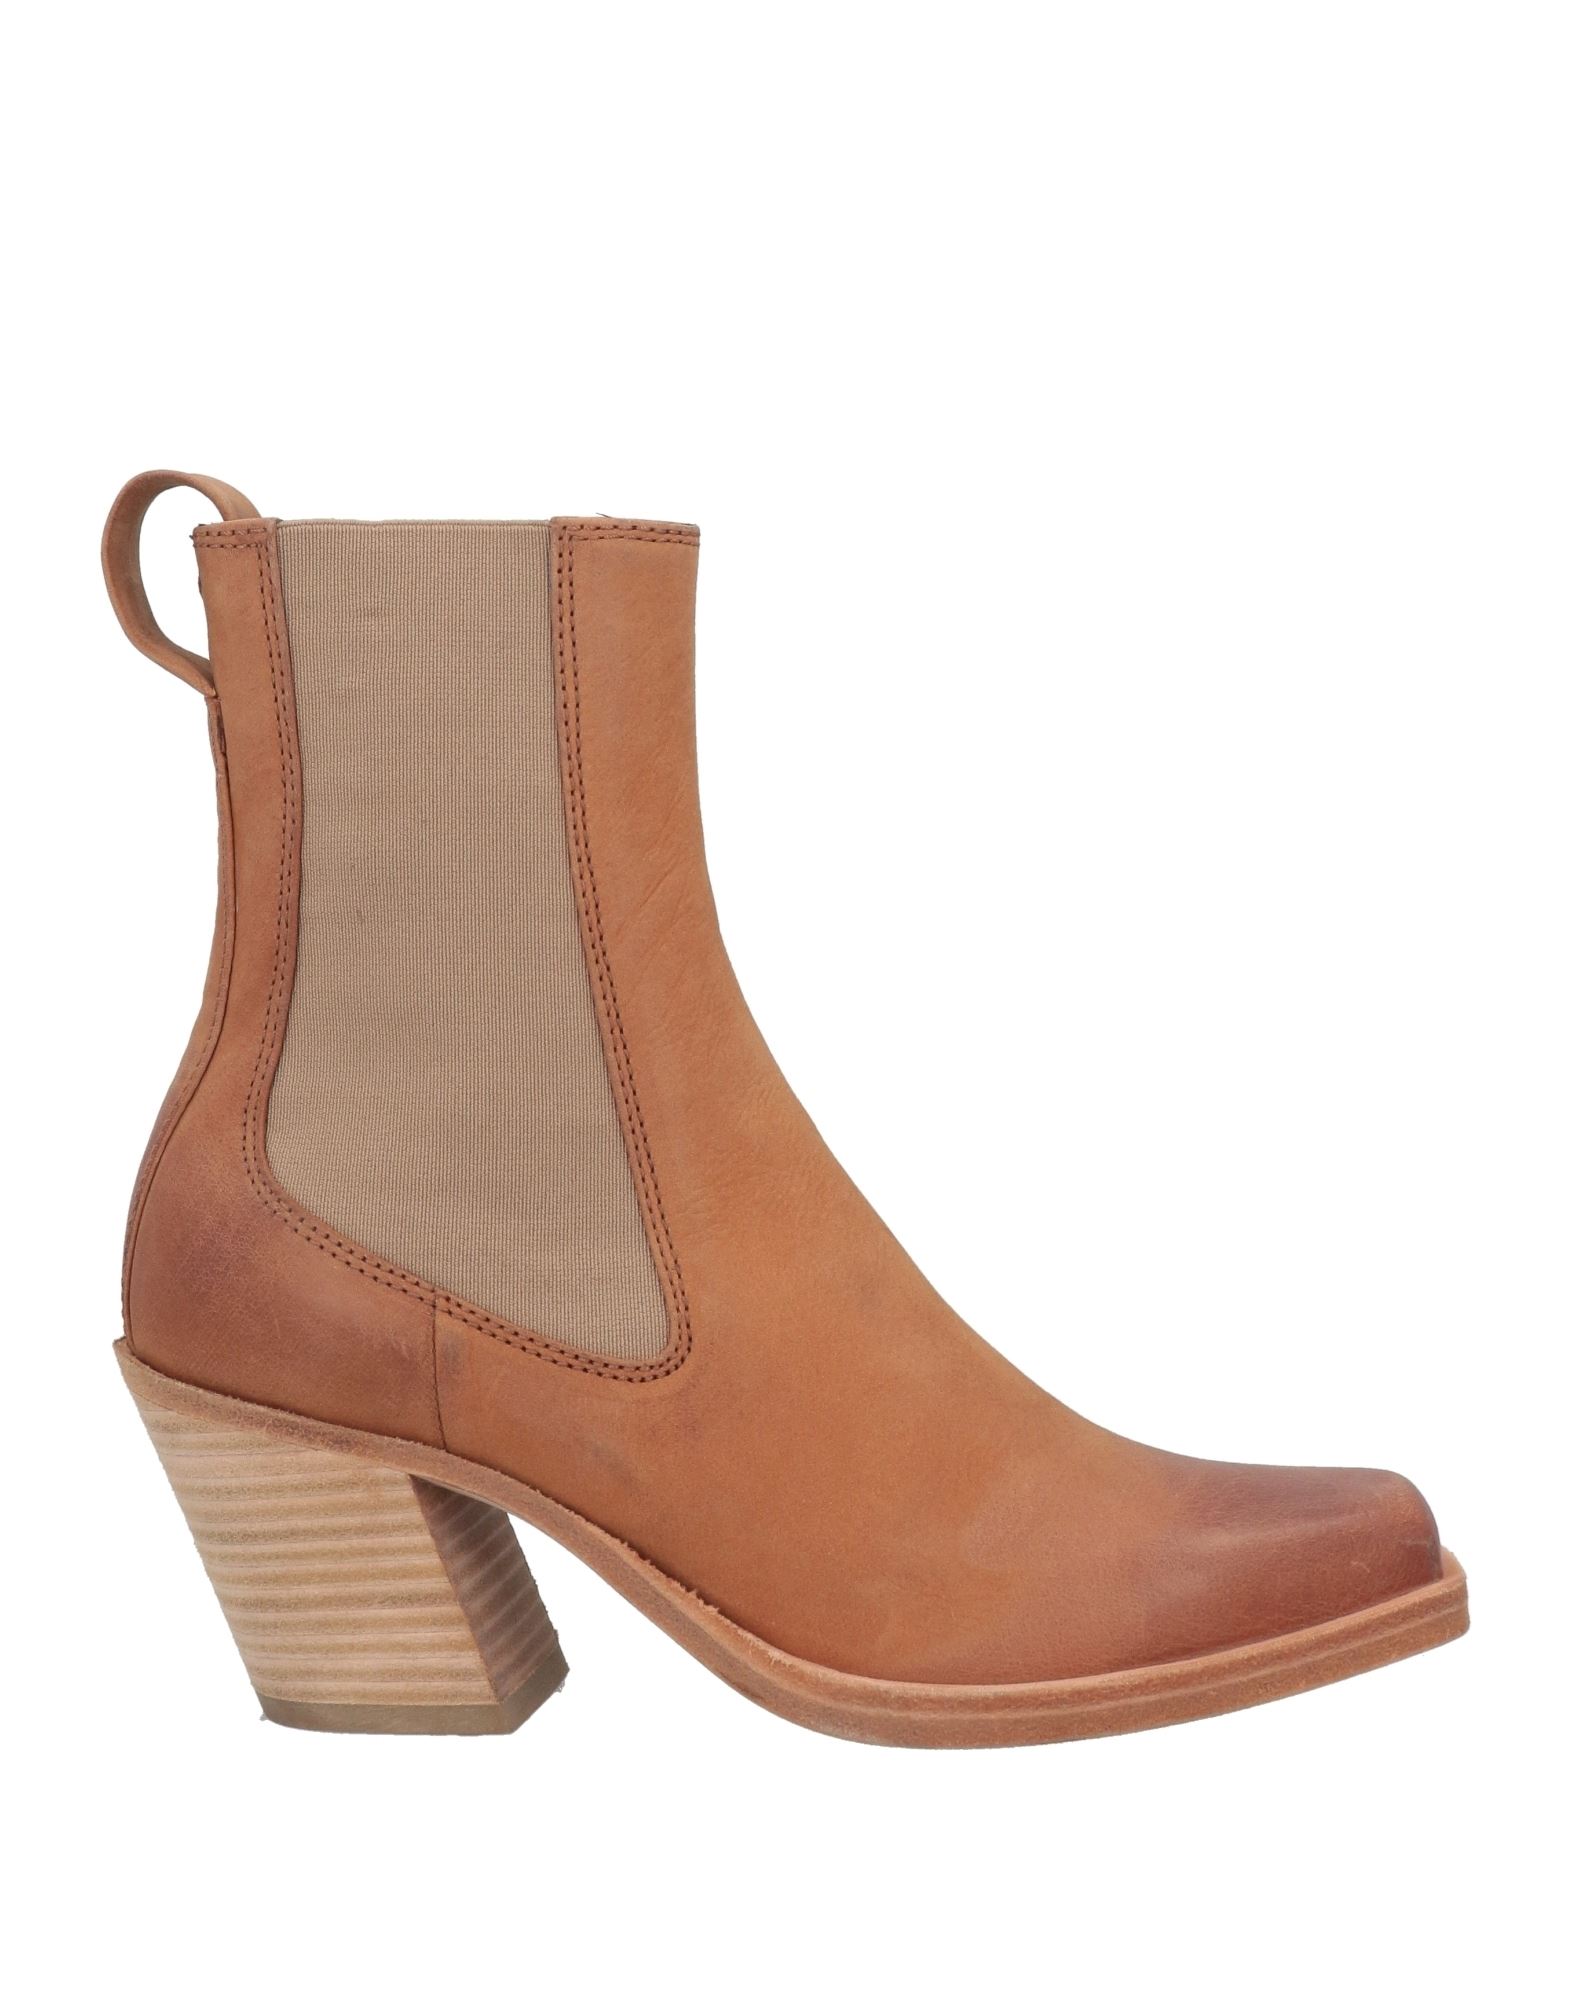 Rag & Bone Woman Ankle Boots Camel Size 7.5 Soft Leather In Beige